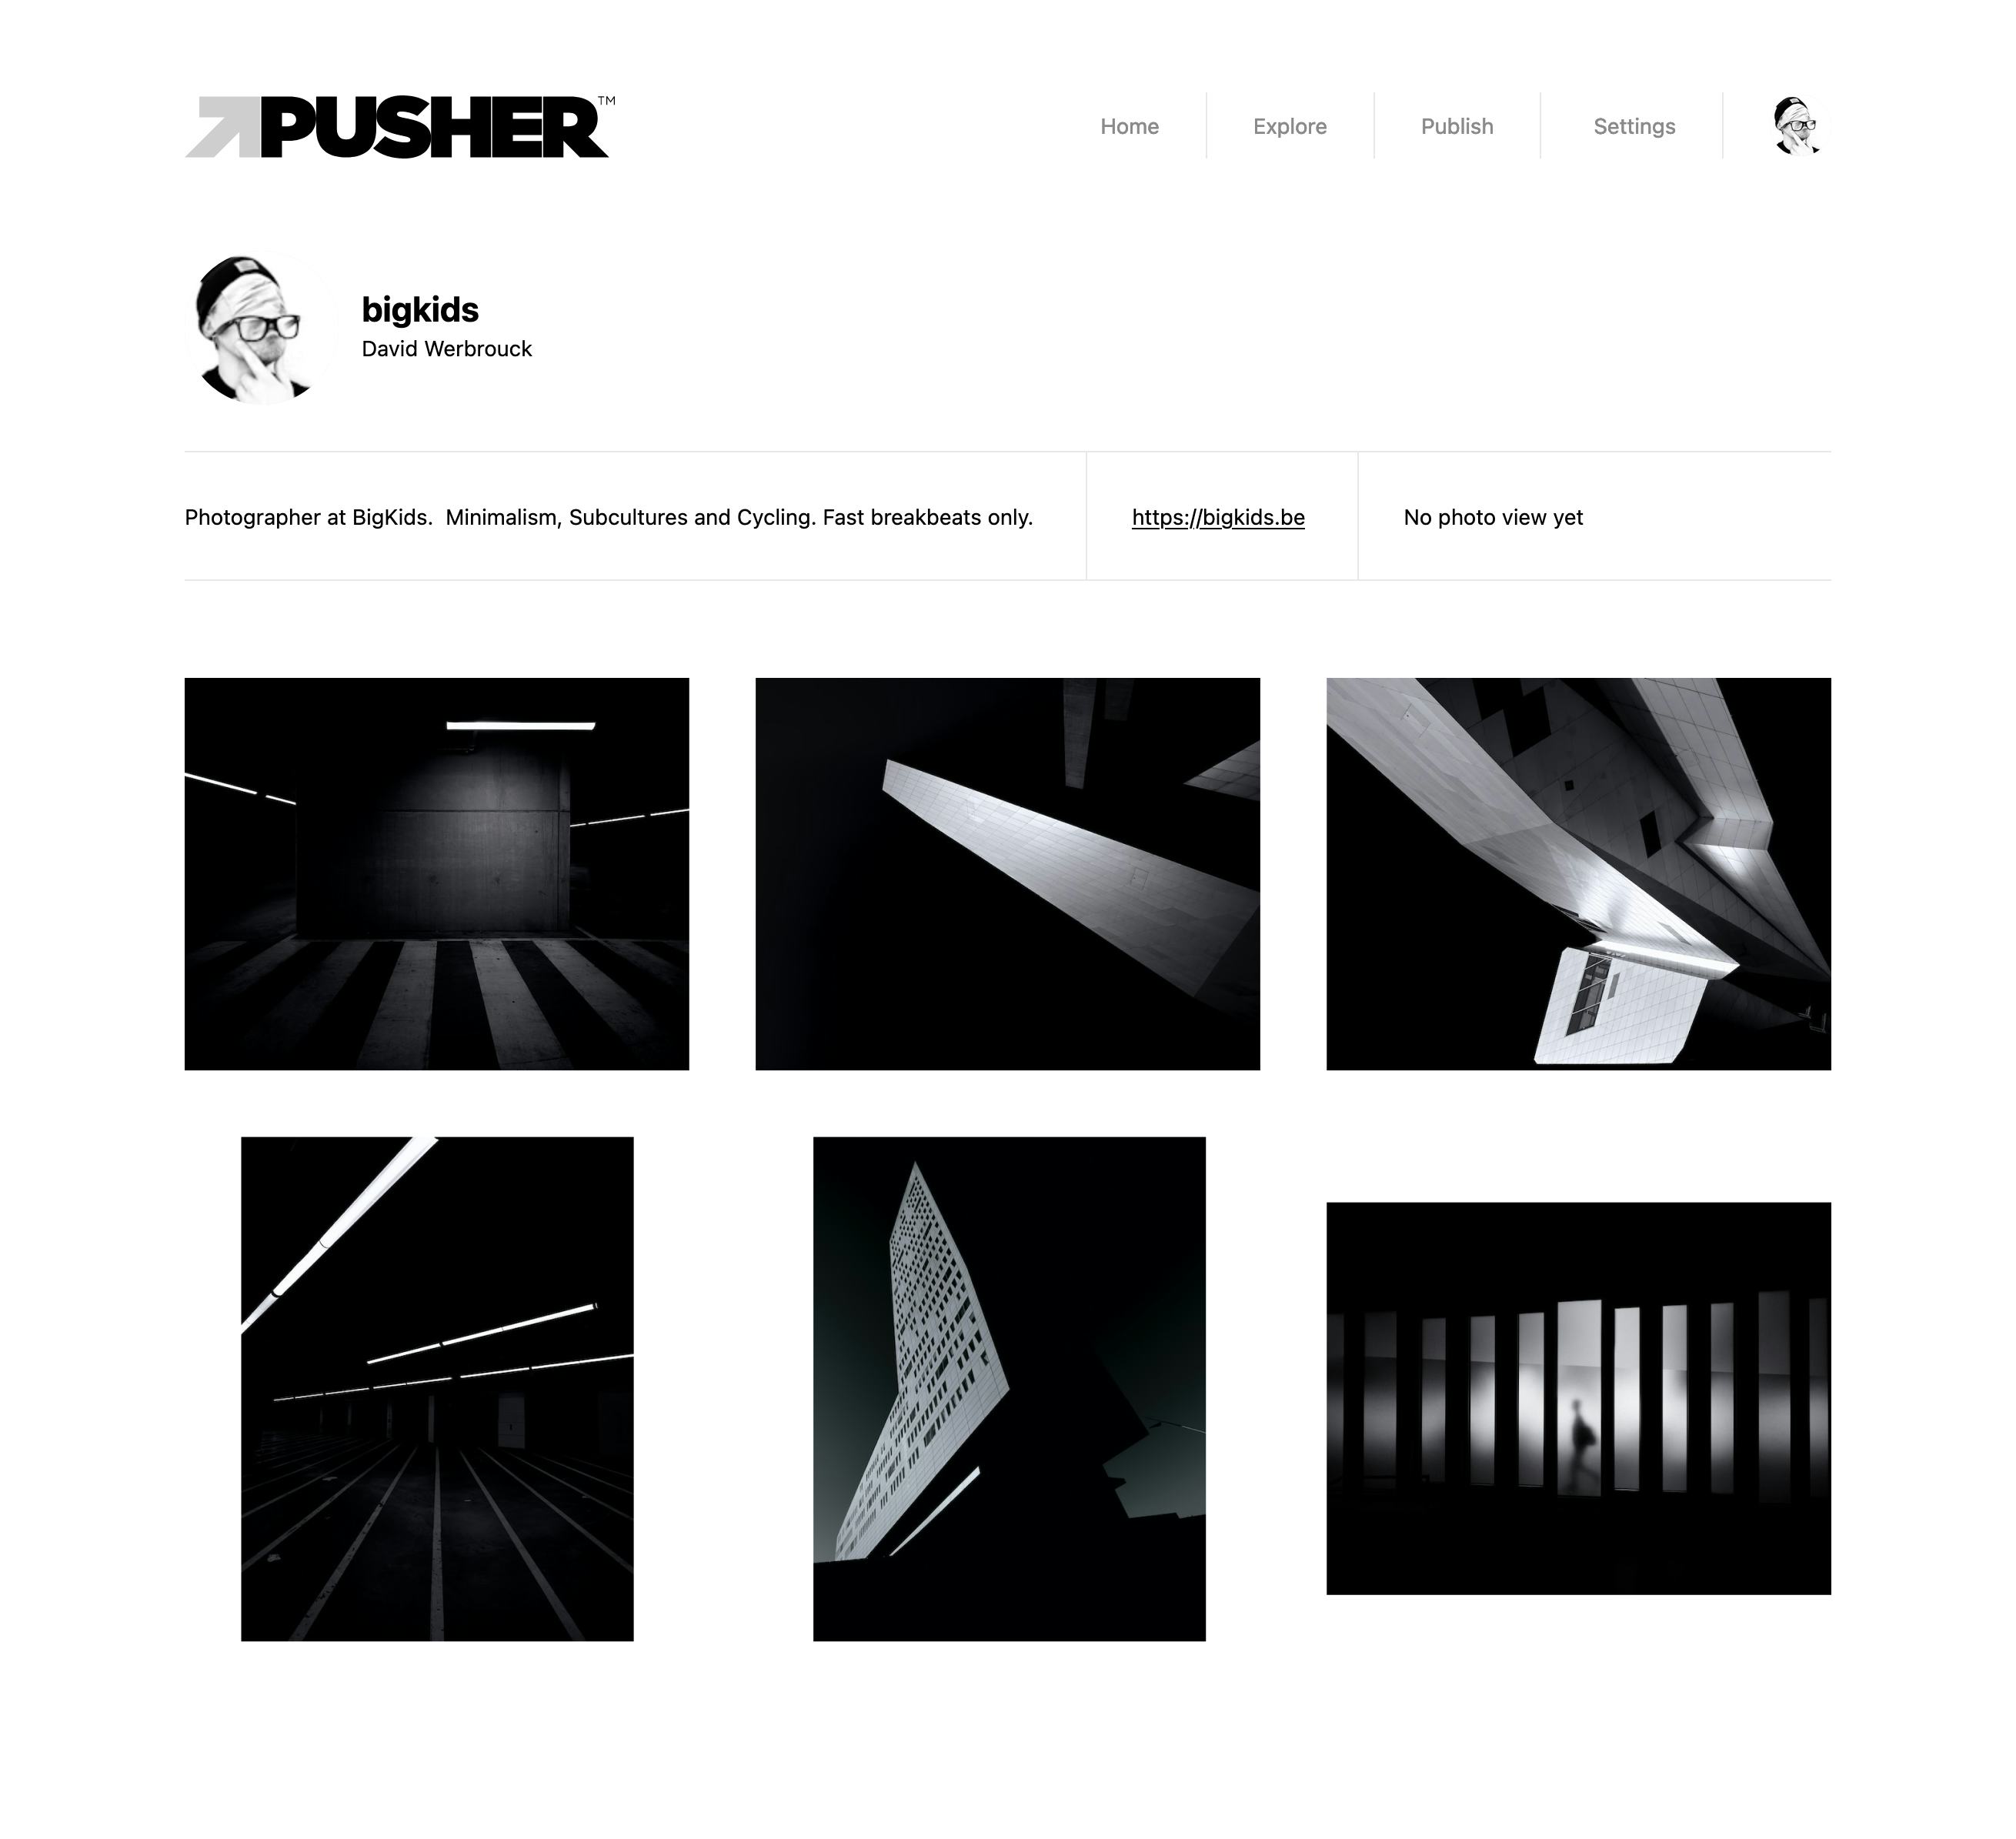 Your Pusher